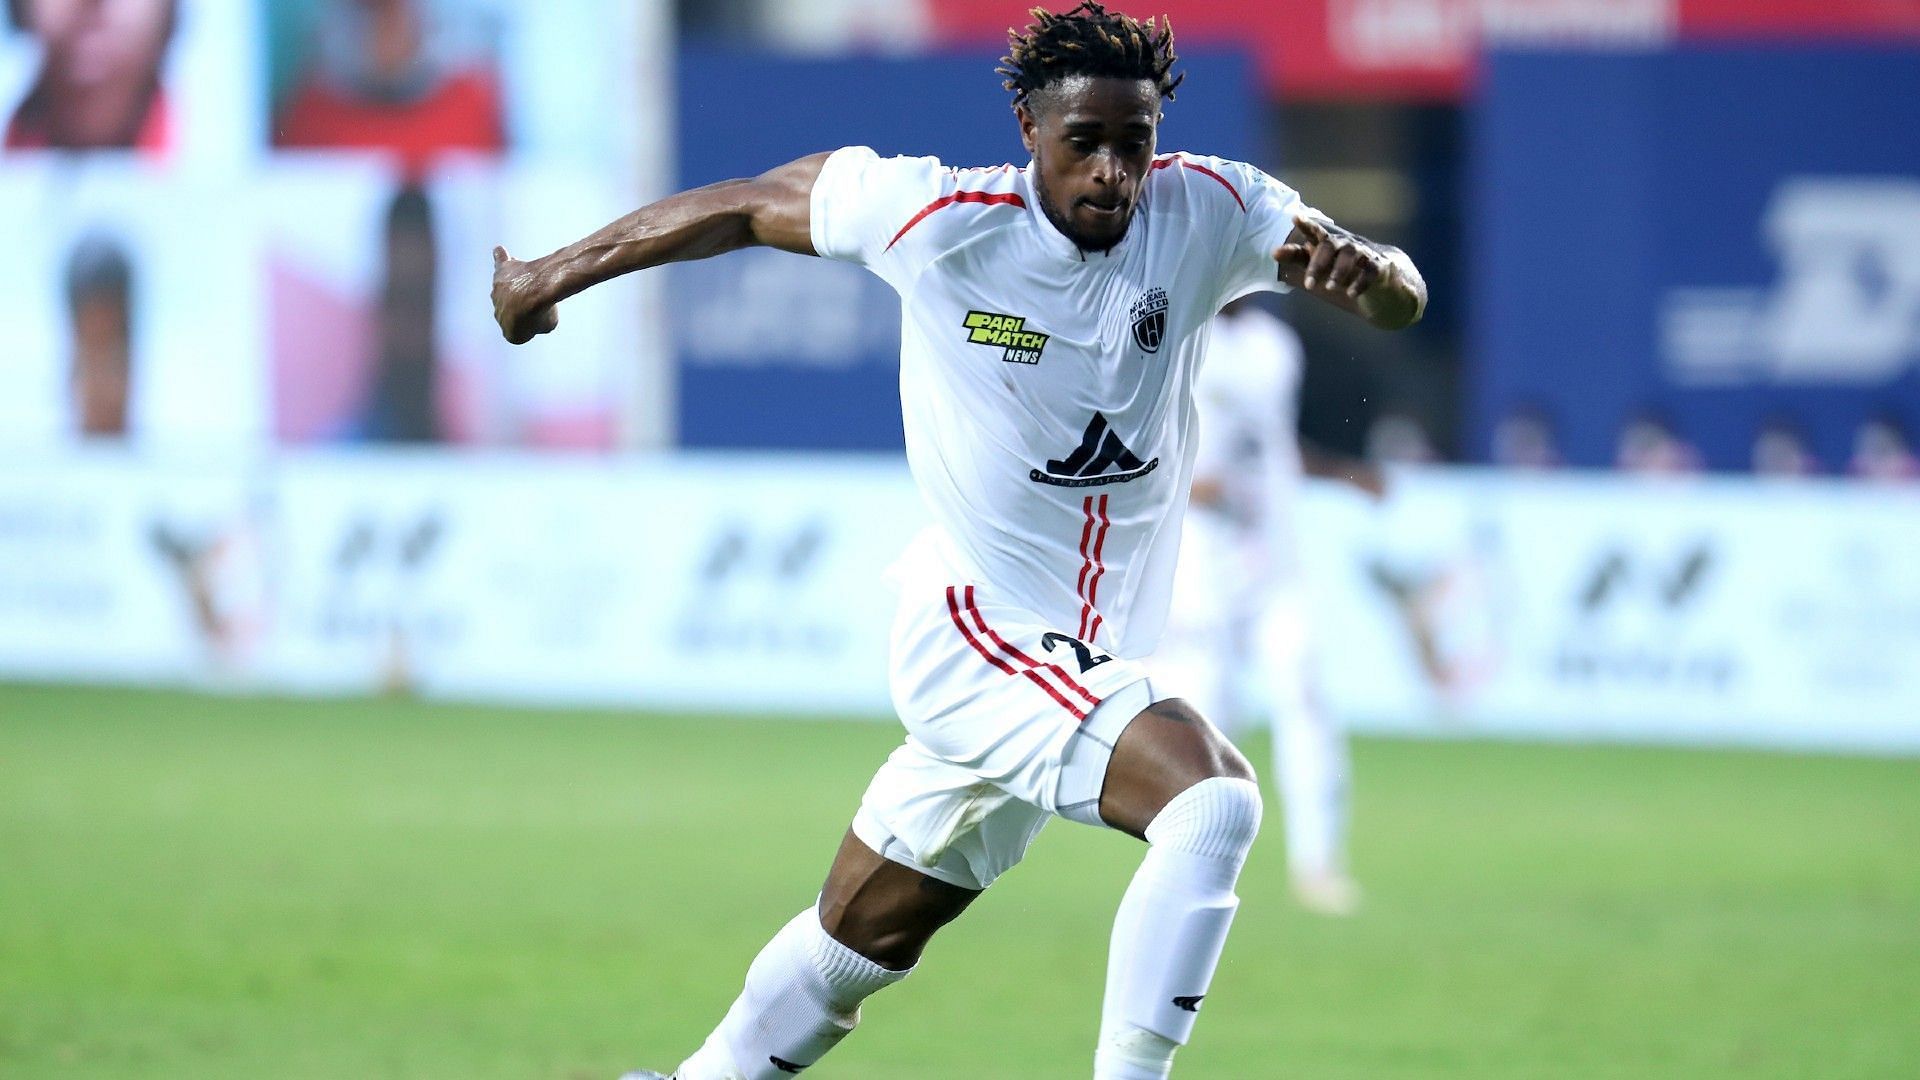 Deshorn Brown in action for NEUFC - Image: ISL Media